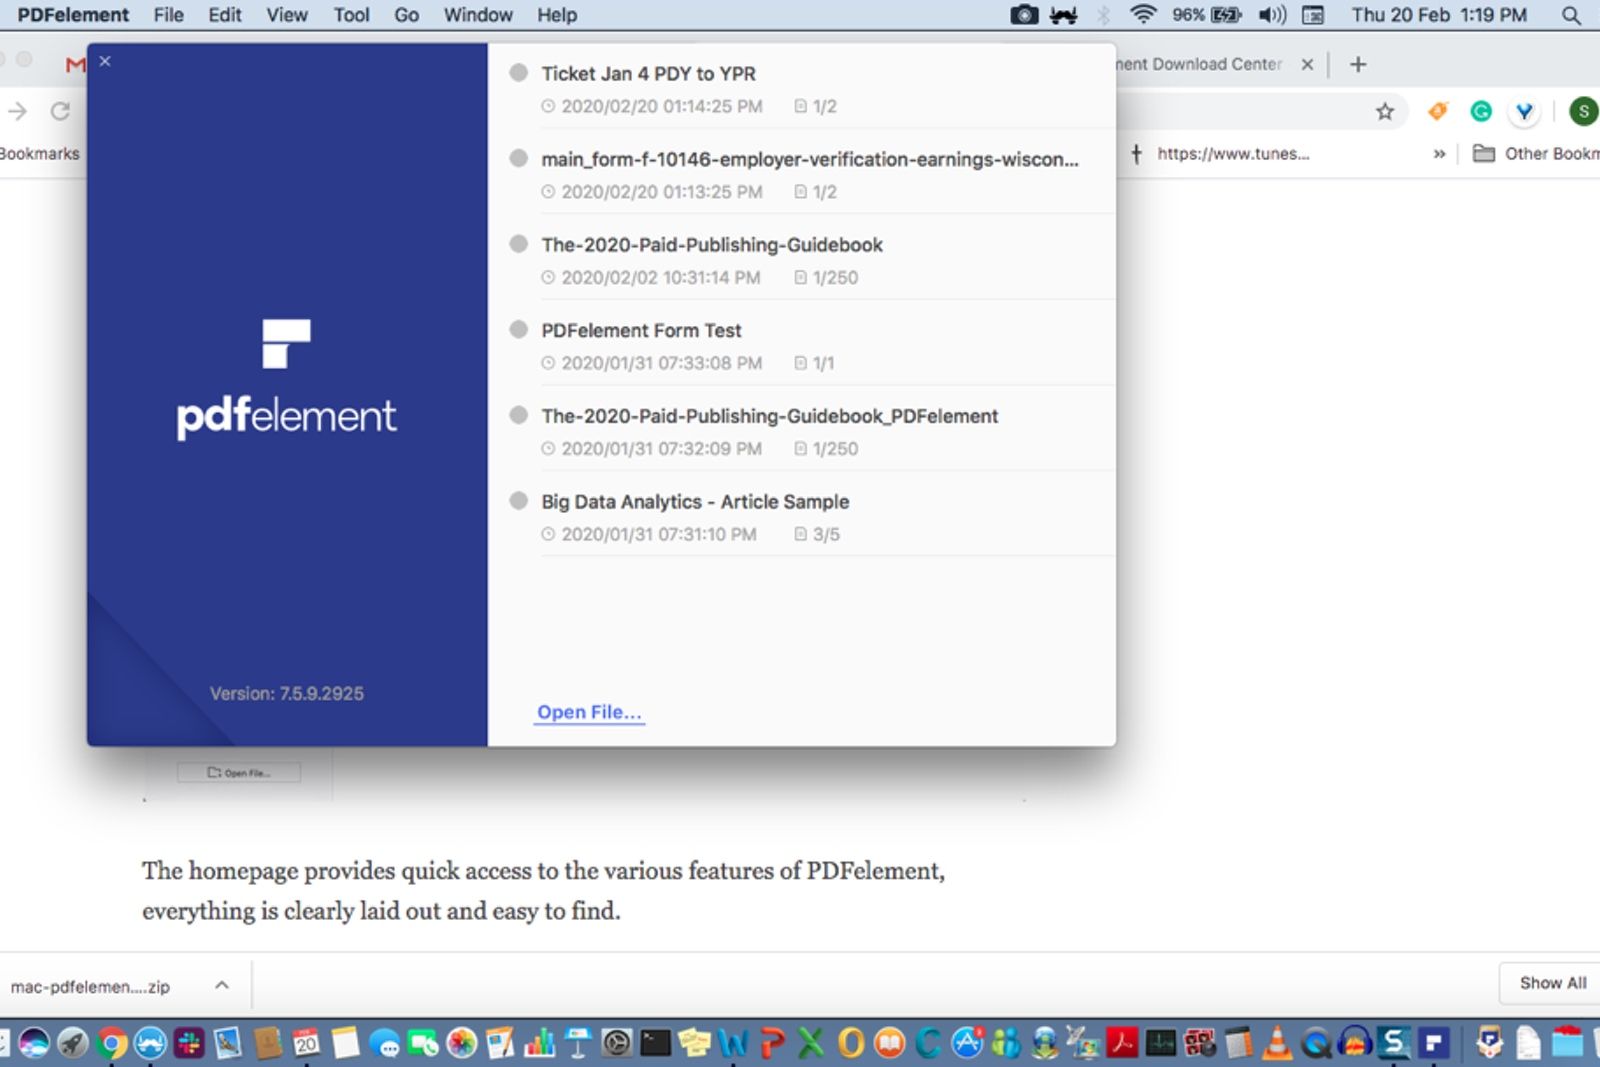 The image shows the home page of PDFelement 7 Pro for Mac